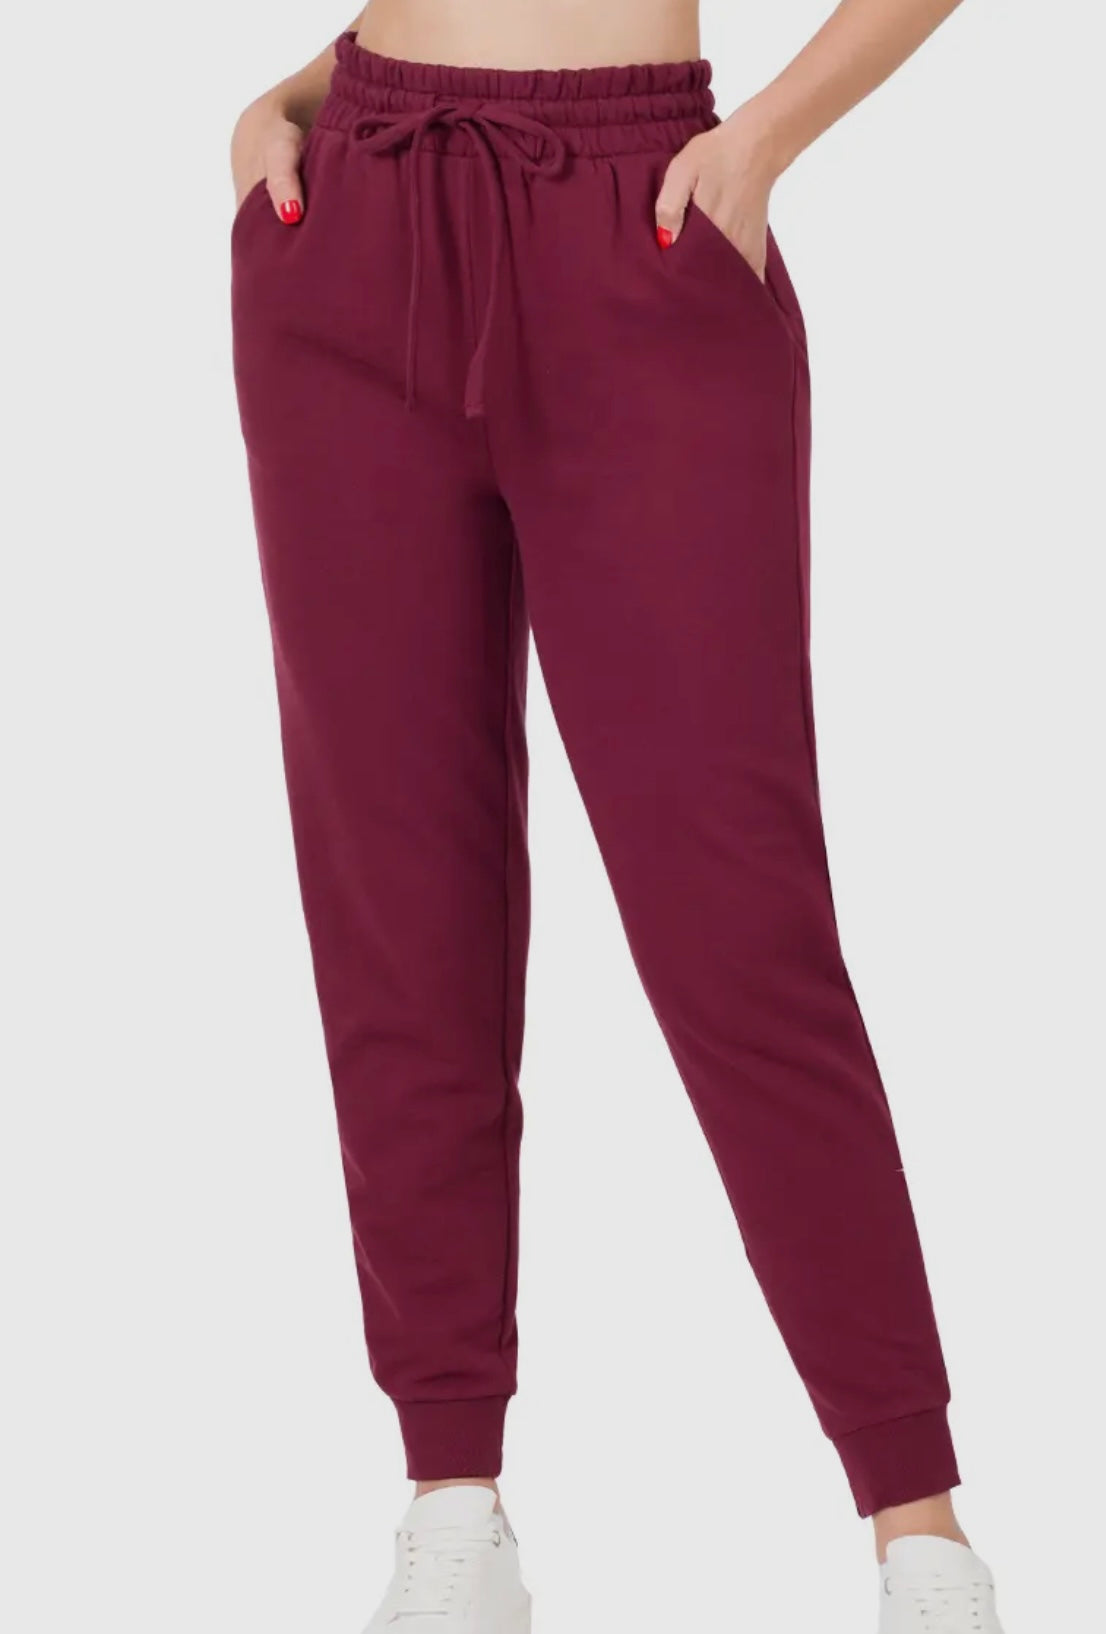 French Terry Jogger Pants with Side Pockets - 2 Colors!